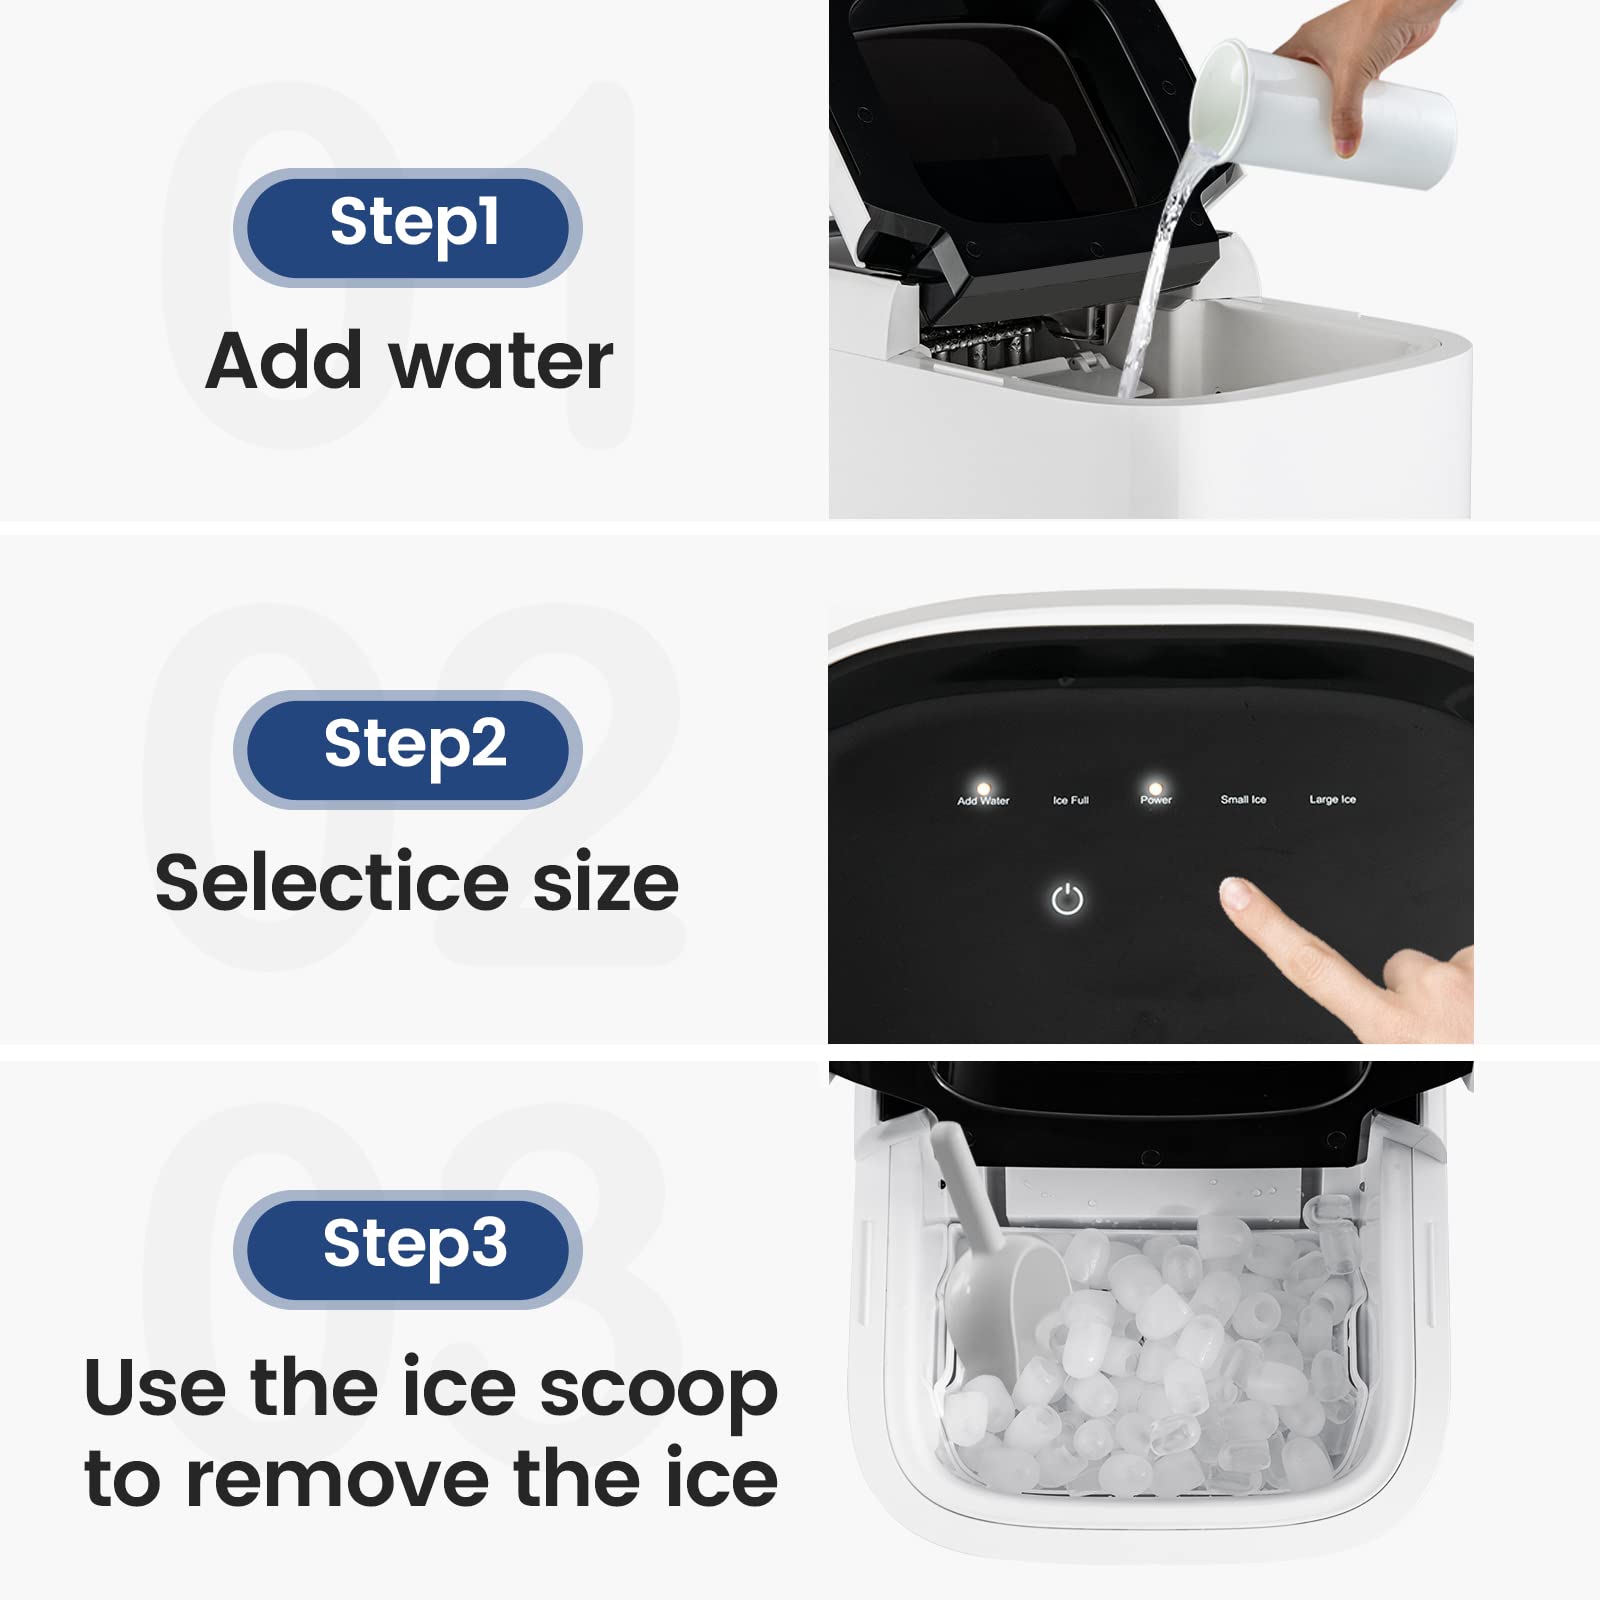 CHEFJOY Table Top Ice Maker, Ice Maker Machine for Home, 36LBS Ice Cube Per Day, 6-8Min Ice Making Time, 30 Mins Self-Cleaning, Small Bullet Ice Maker, Dual Lid Design